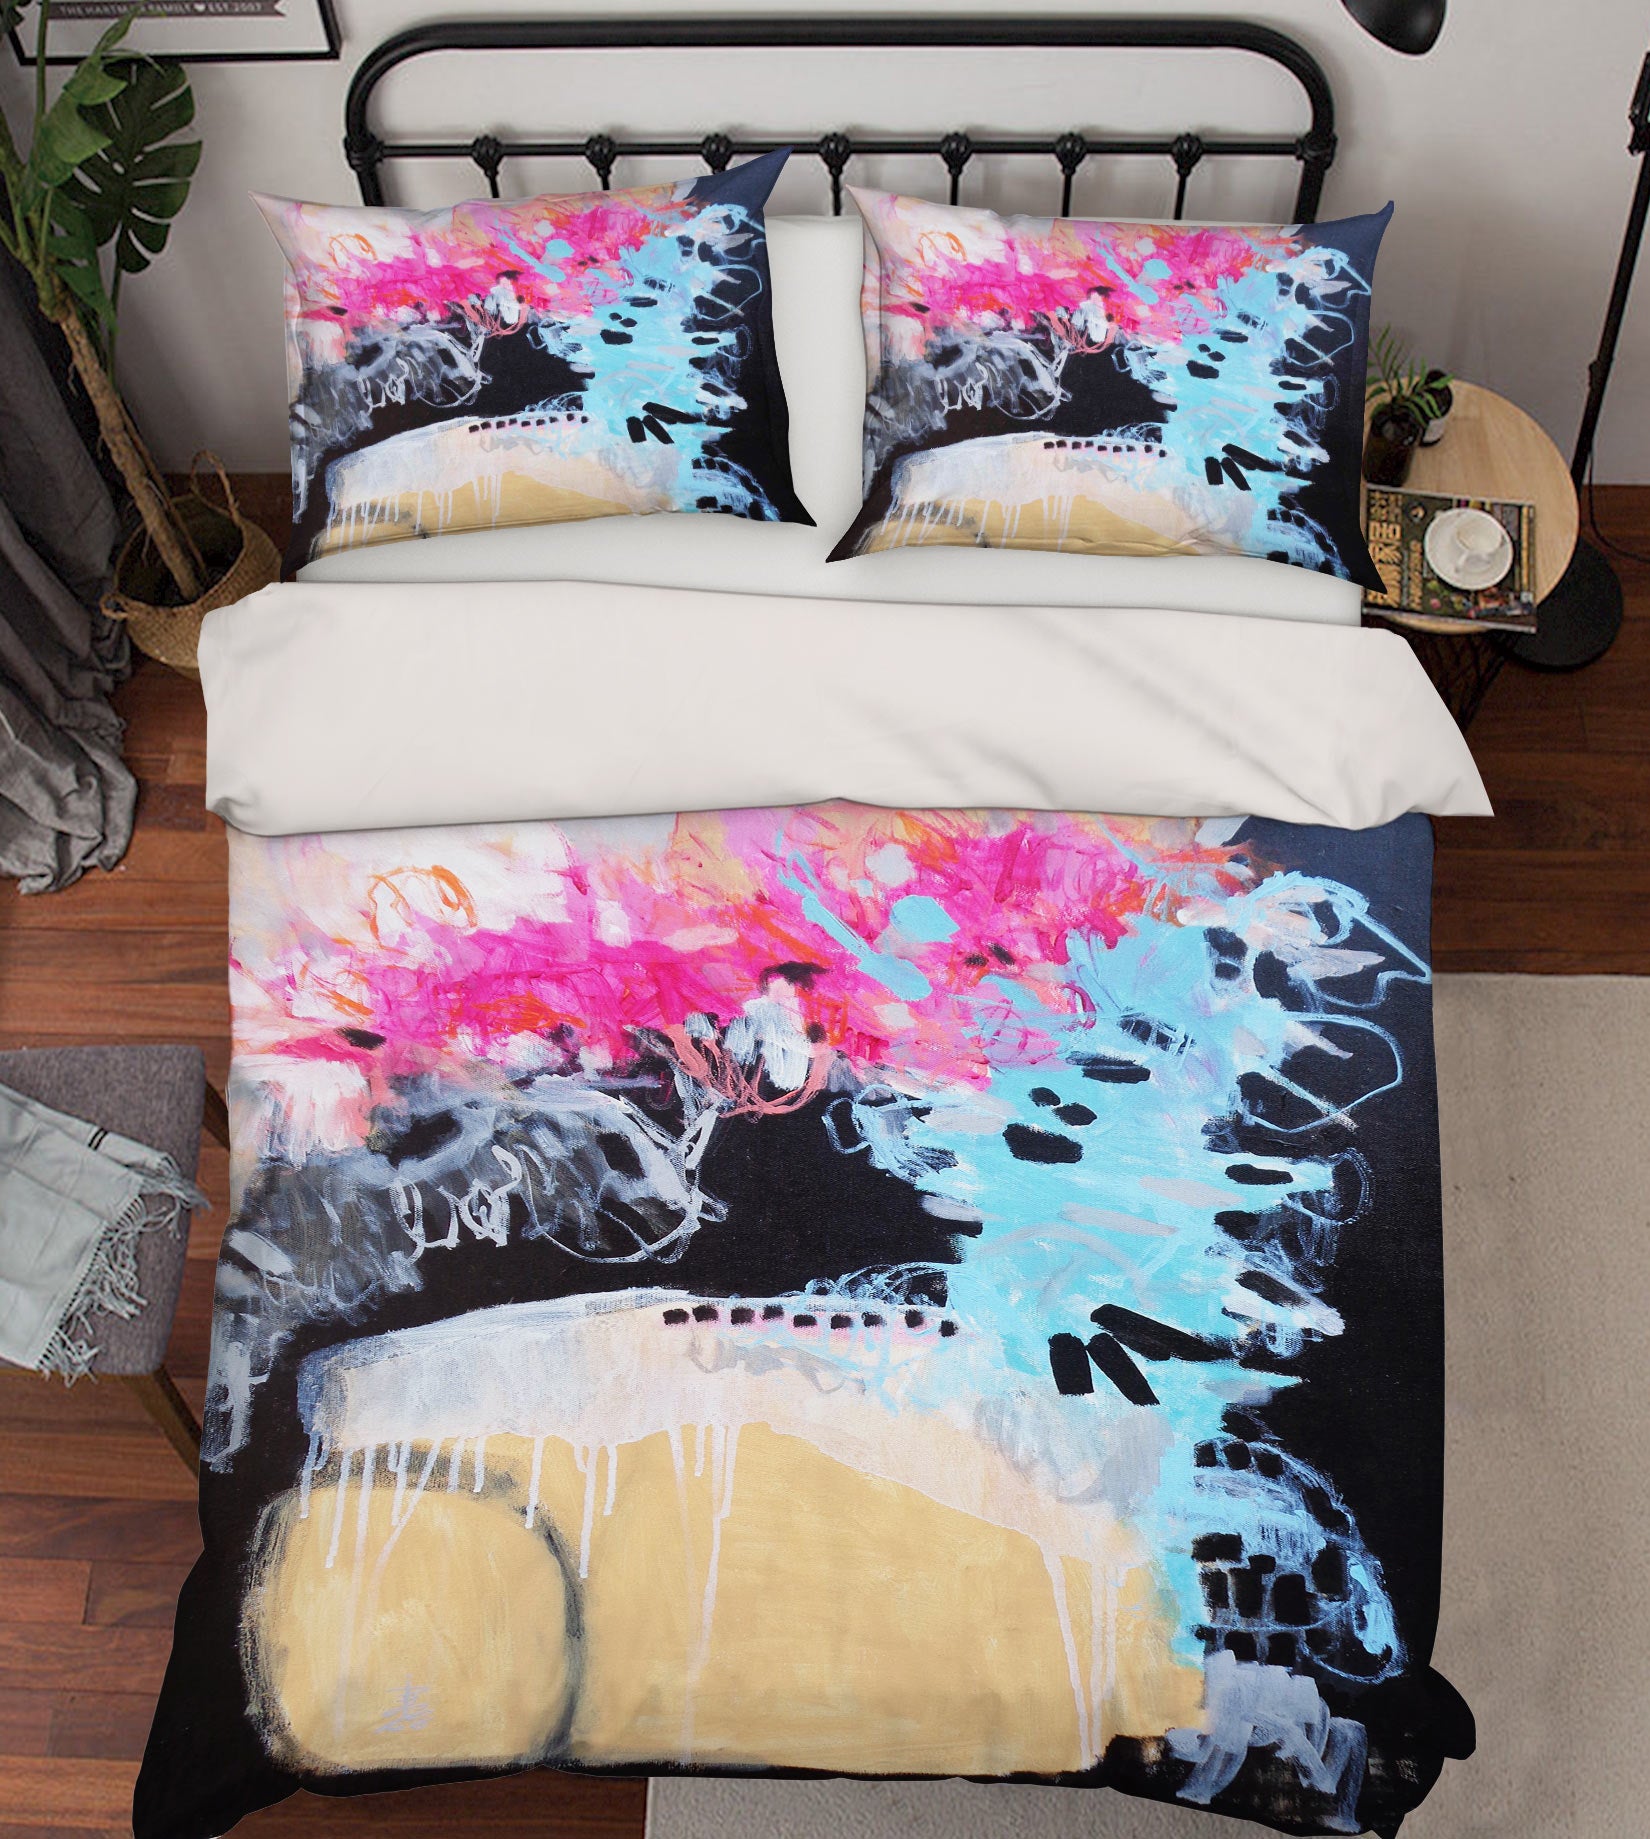 3D Painted Watercolor 1183 Misako Chida Bedding Bed Pillowcases Quilt Cover Duvet Cover